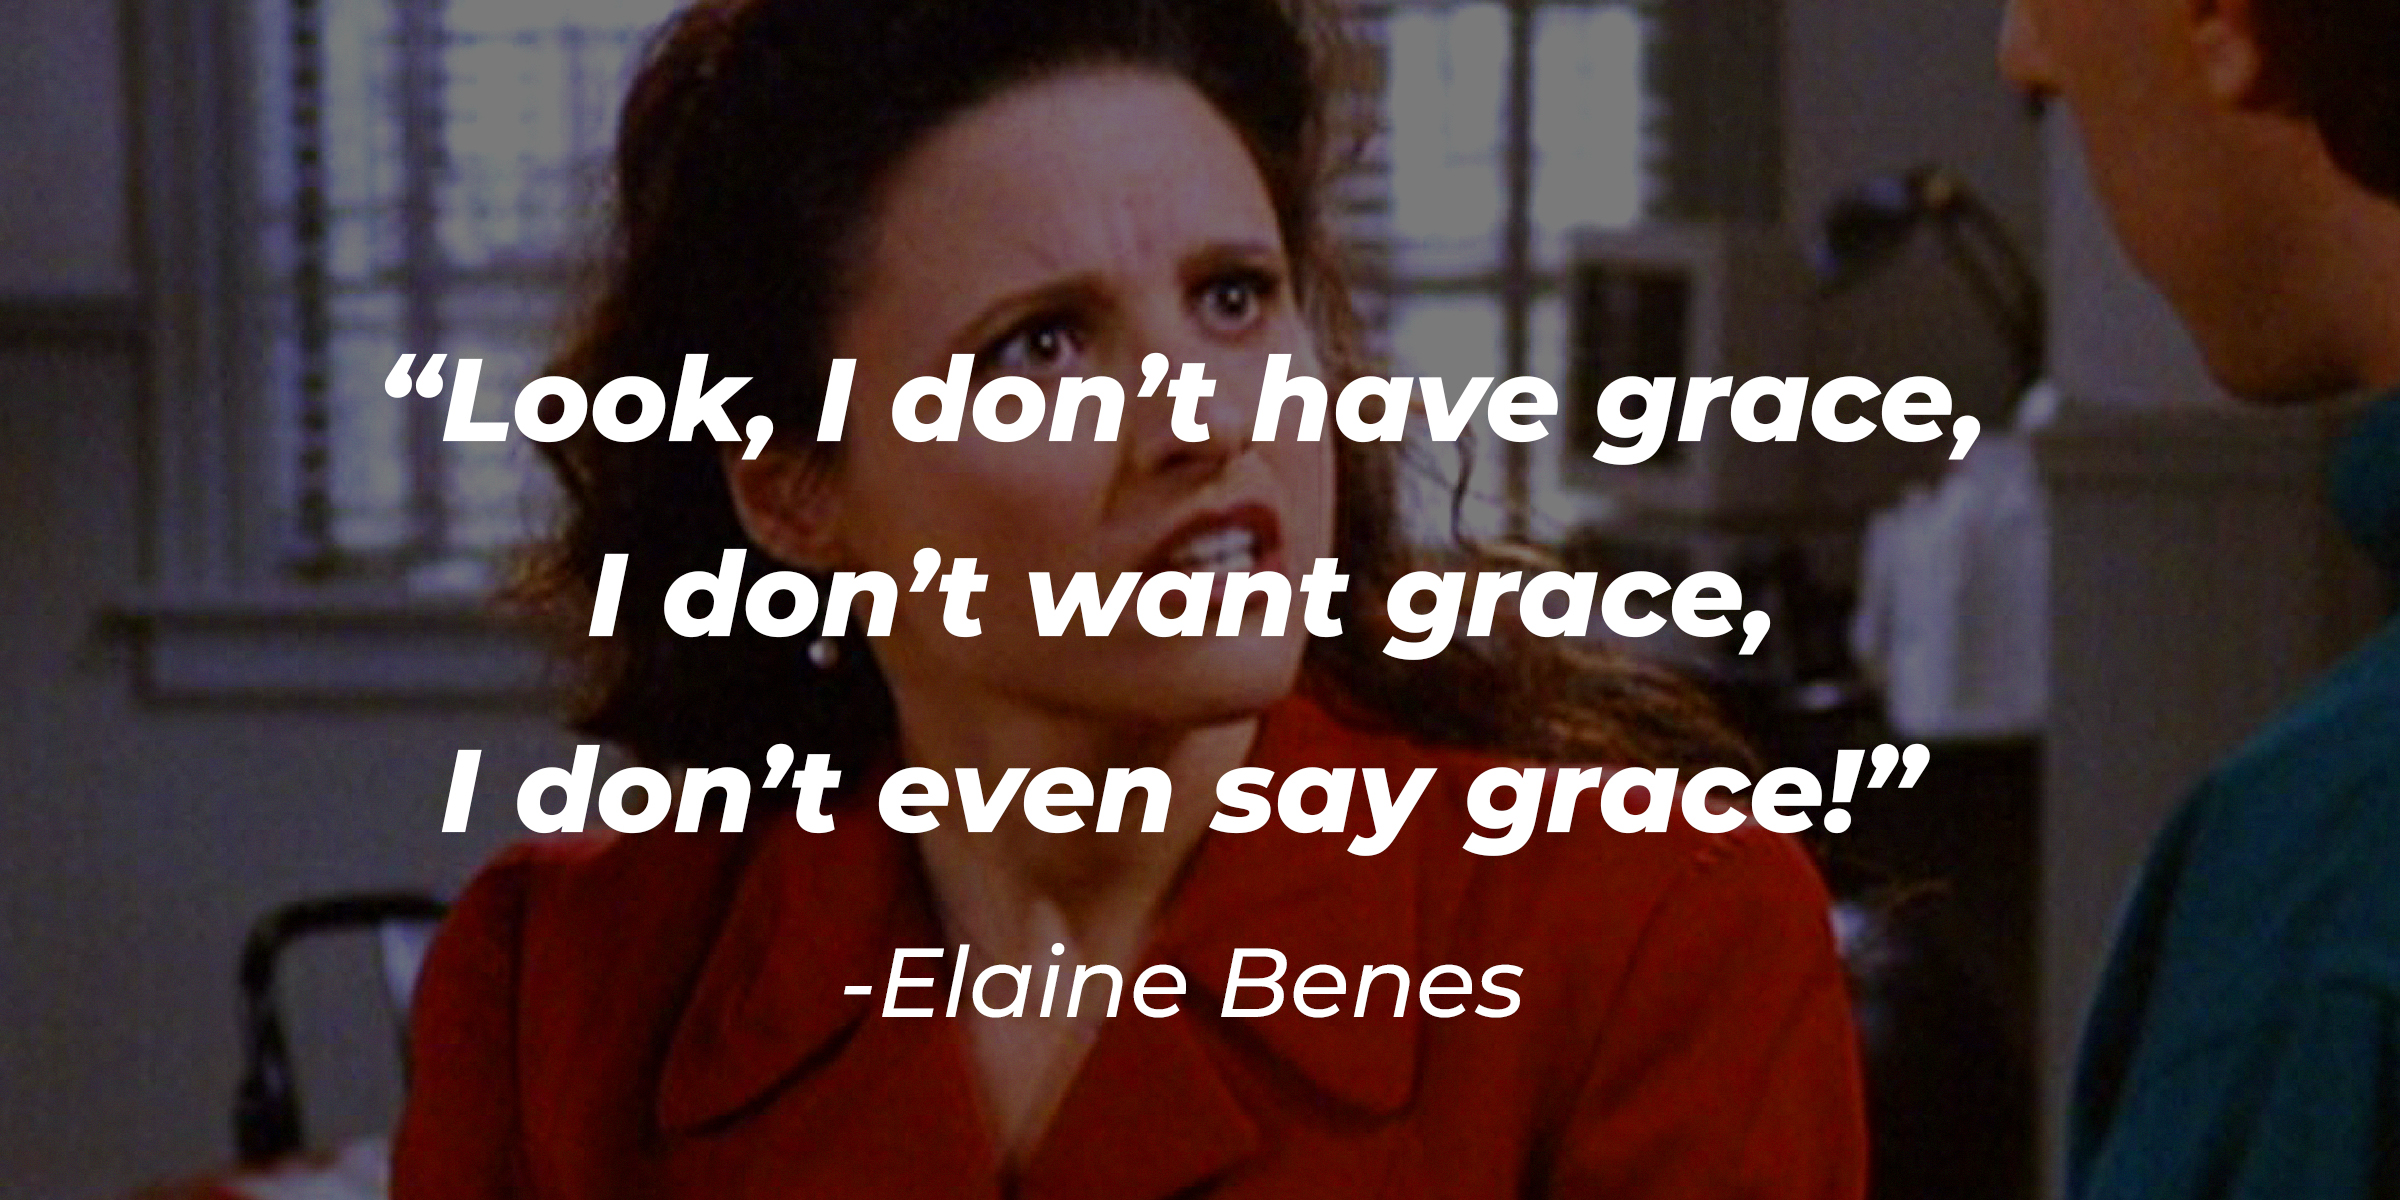 An image of Elaine Benes, with her quote: “Look, I don’t have grace, I don’t want grace, I don’t even say grace!” | Source: Facebook.com/seinfeld